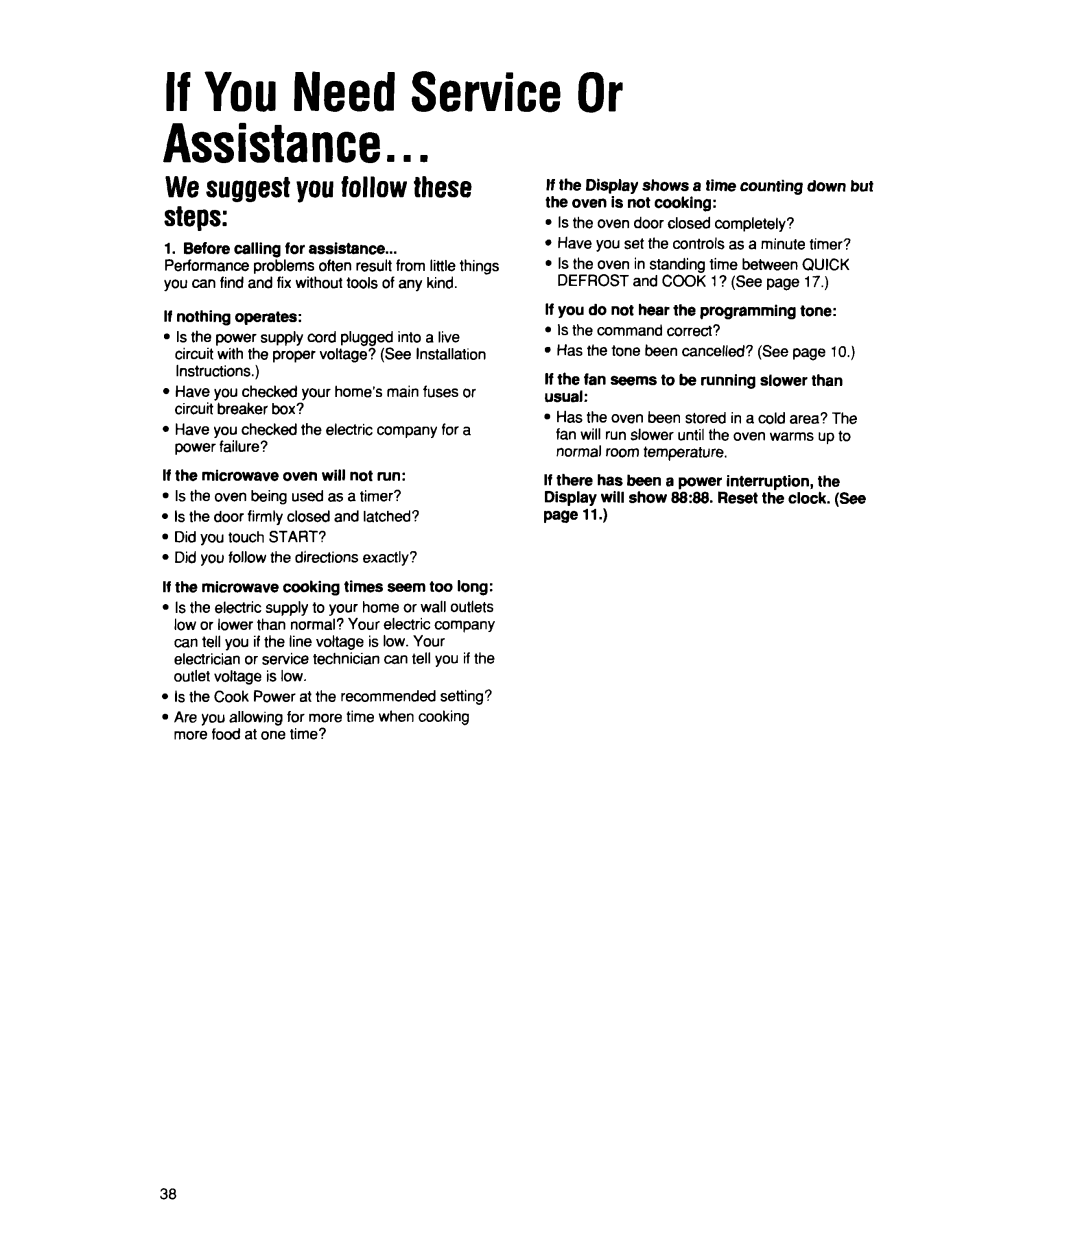 Whirlpool MS2100XW If You Need Service Or Assistance.n n, We suggest you follow these steps, Before calling for assistance 